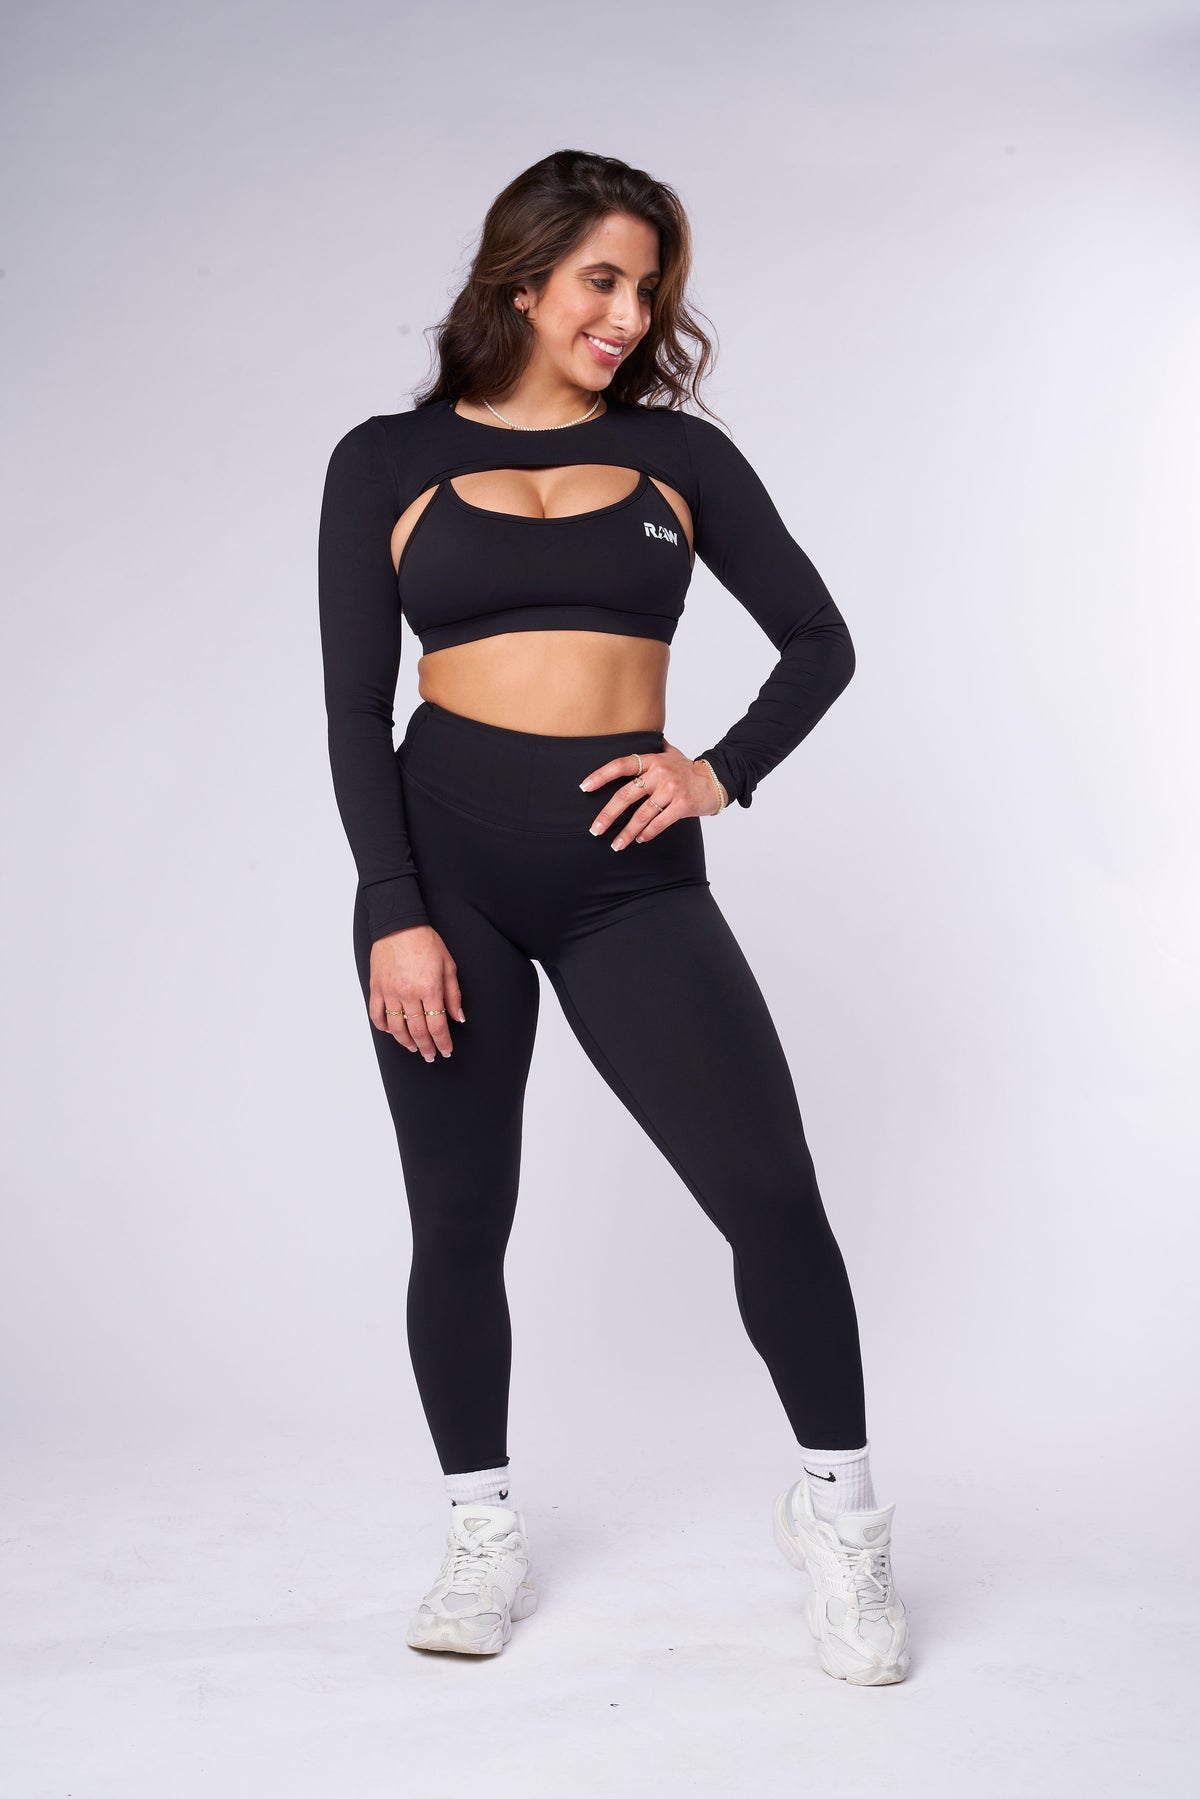 Get Active - Sports Bra + Arm Cover